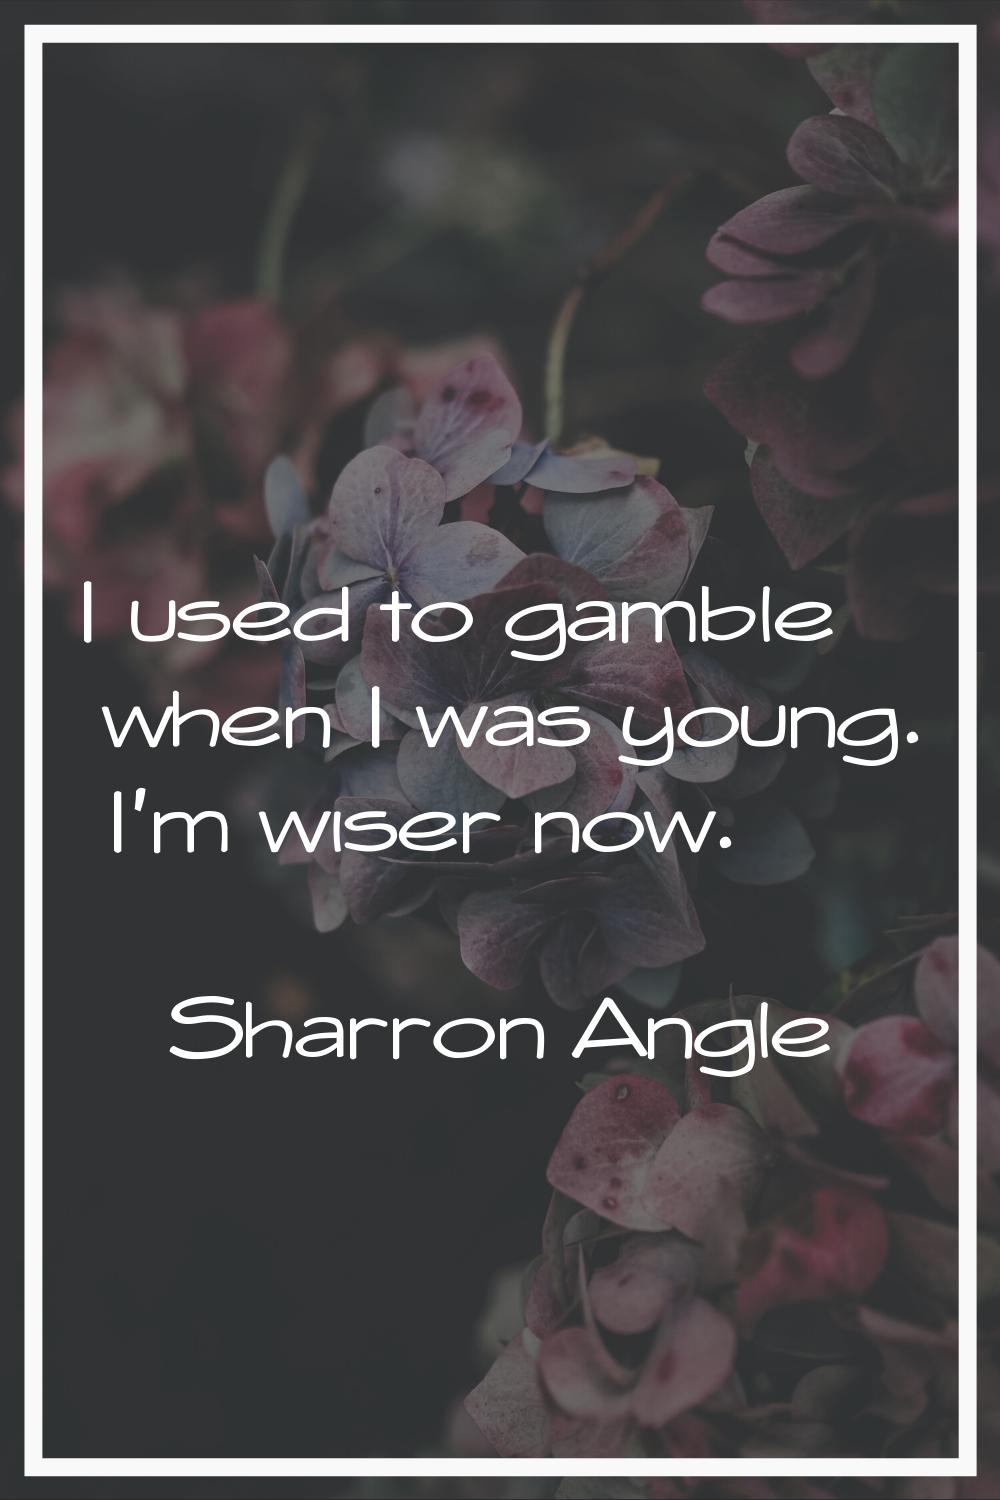 I used to gamble when I was young. I'm wiser now.